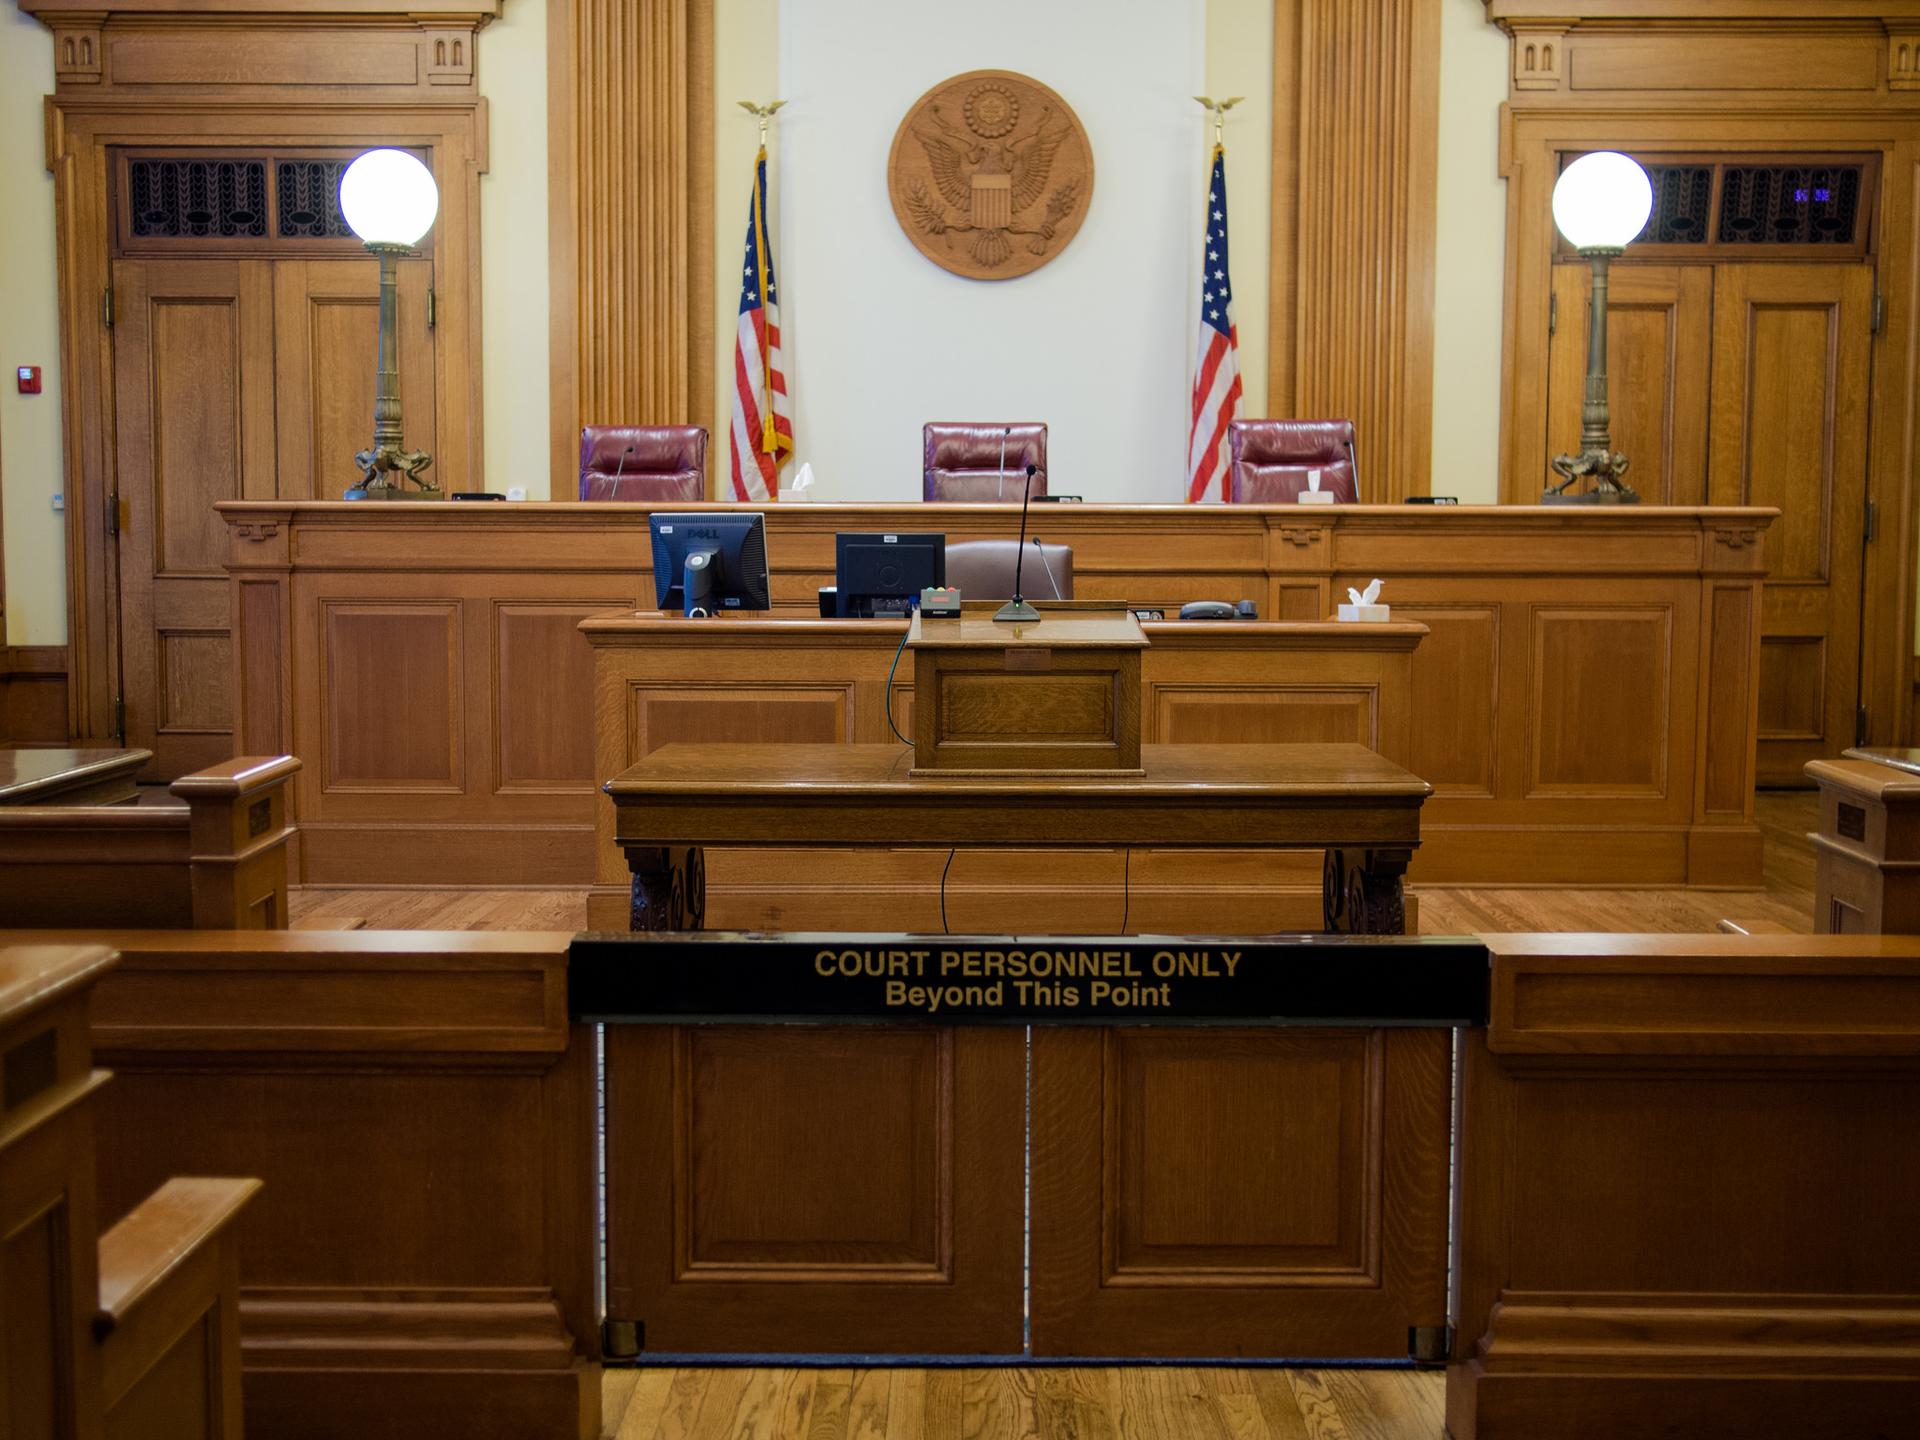 Since the inception of predictive algorithm software in U.S courtrooms, more than a million Americans have been analyzed using the technology.